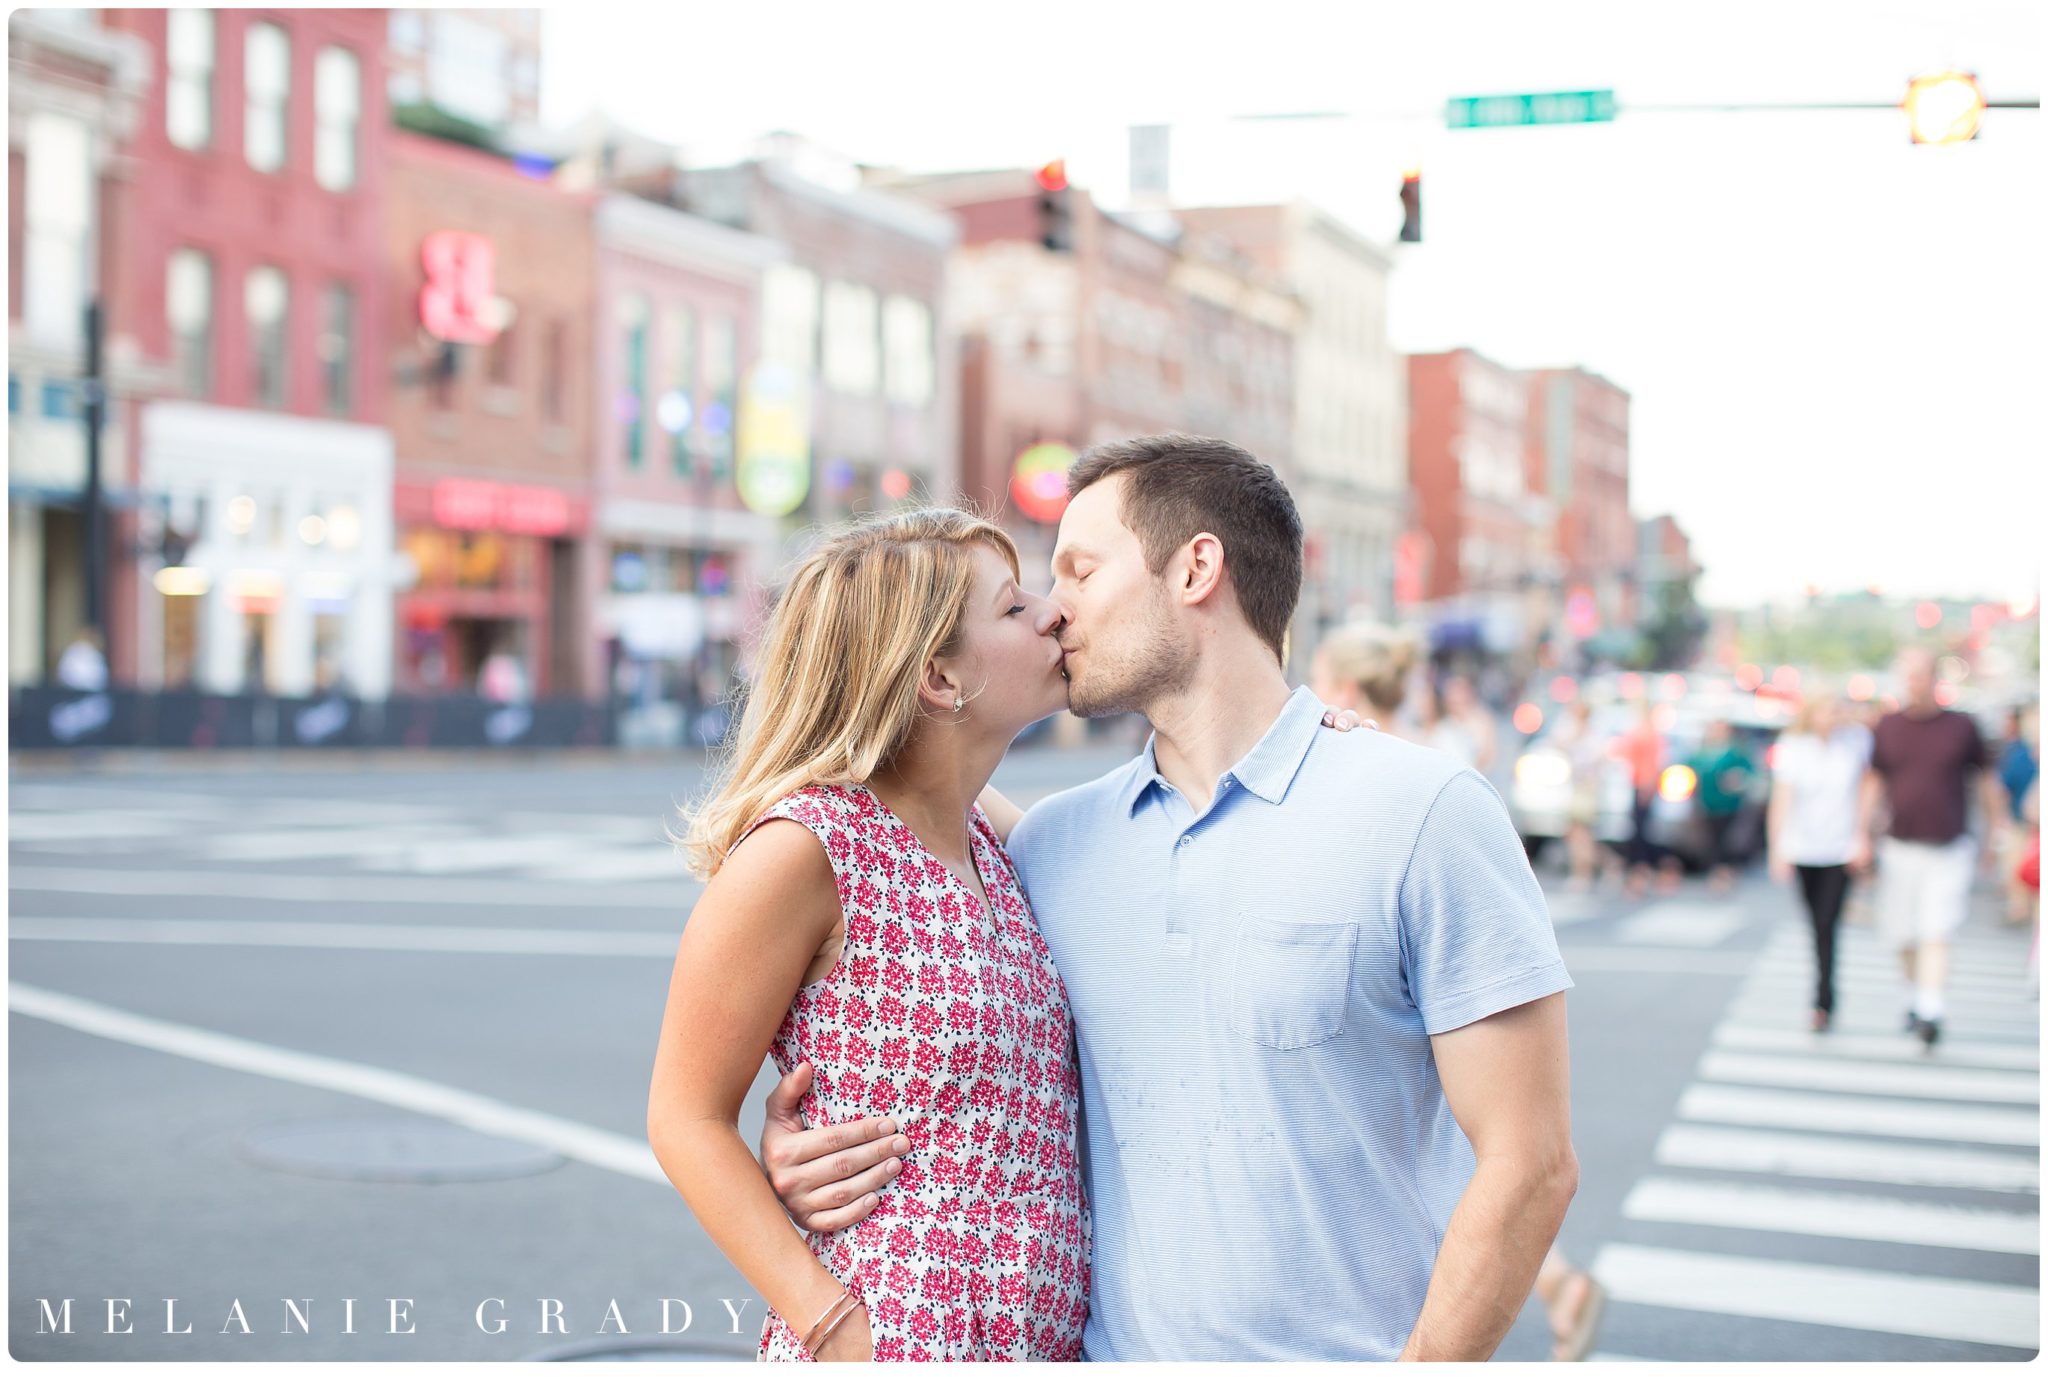 Destination engagement session in Nashville, Tennessee with Melanie Grady Photography, best engagement photographer in Nashville, Award winning wedding photographer, best nashville wedding photography, downtown, city, riverwalk, symphony, acme feed and seed, broadway, casual and fun, rent the runway, destination wedding photographer,